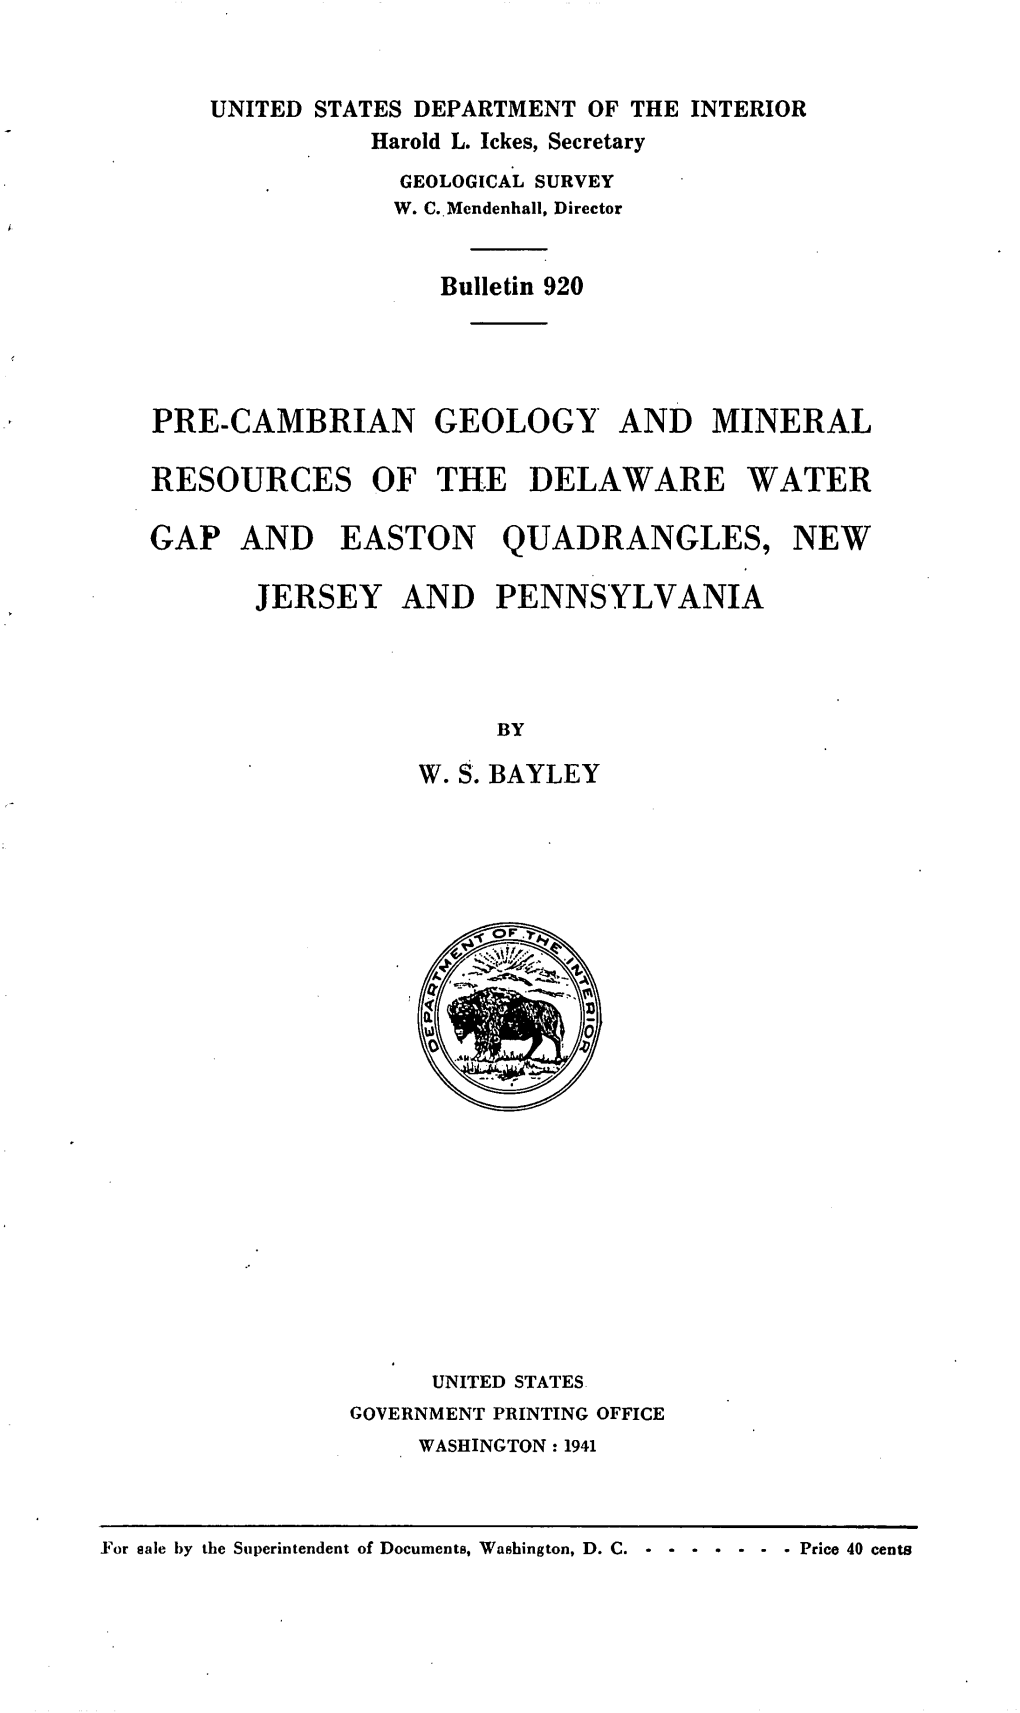 Pre-Cambrian Geology and Mineral Resources of the Delaware Water Gap and Easton Quadrangles, New Jersey and Pennsylvania